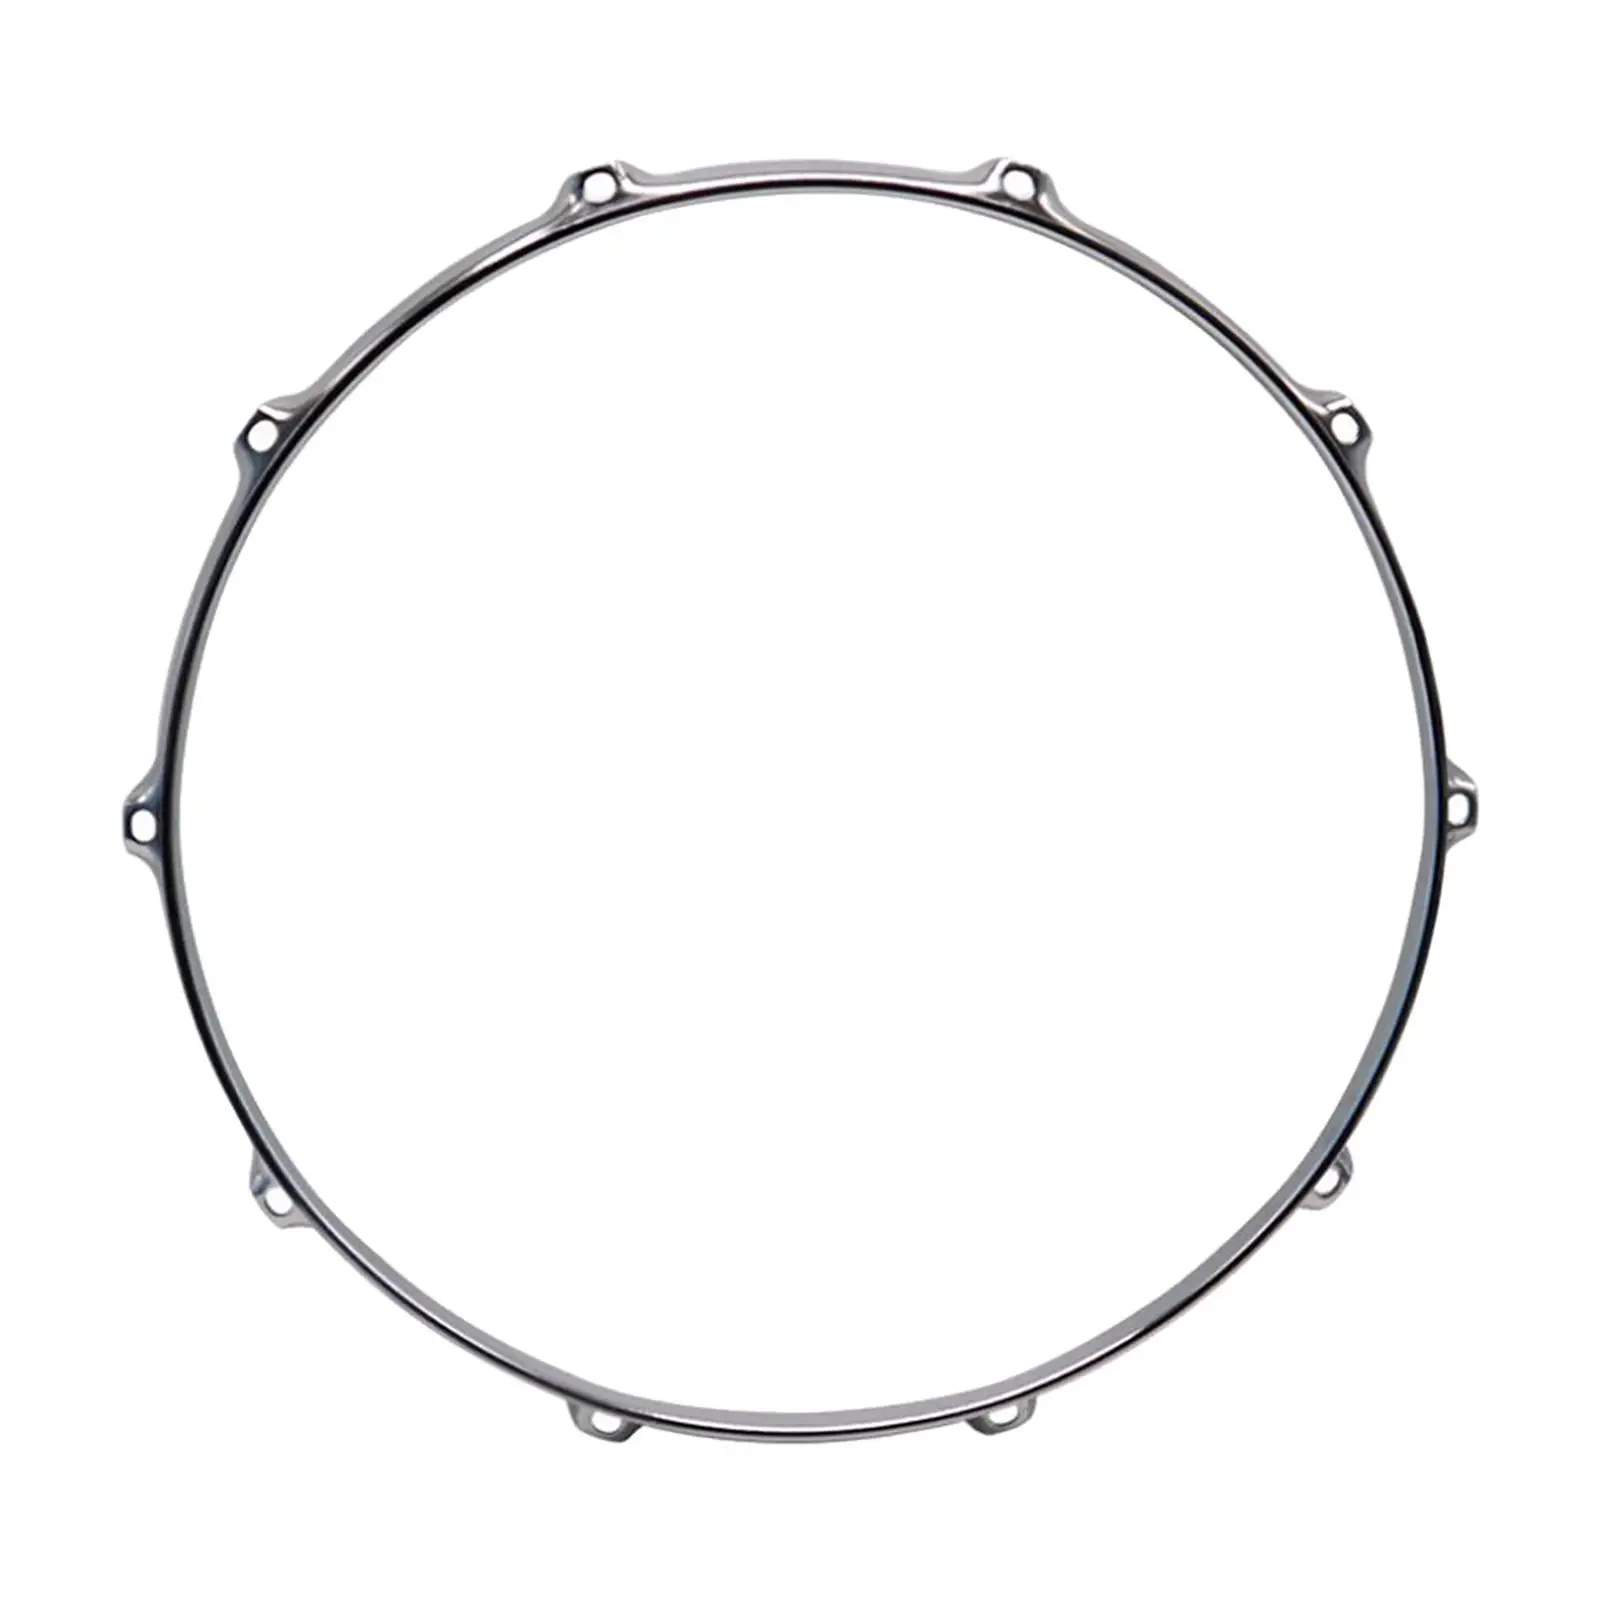 Drum Hoop Portable 14 inch 8 Lug Batter Hoop for Accessory Home Decor Office